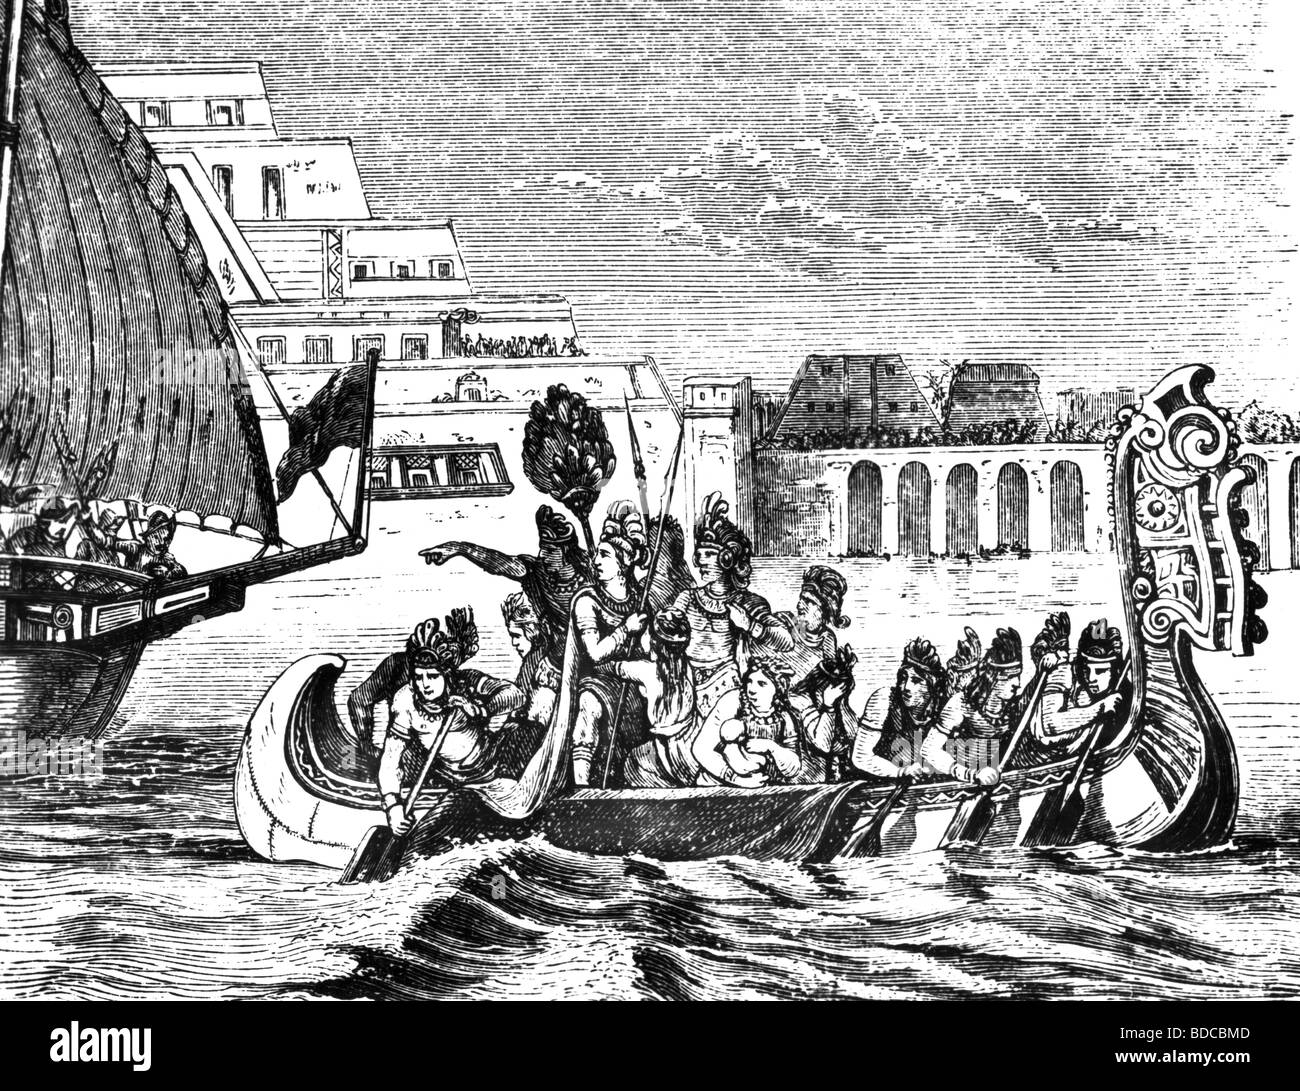 Cuauhtemoc, circa 1502 - 28.2.1525, Aztec ruler, his capture, August 1521, wood engraving, published 1904, Stock Photo